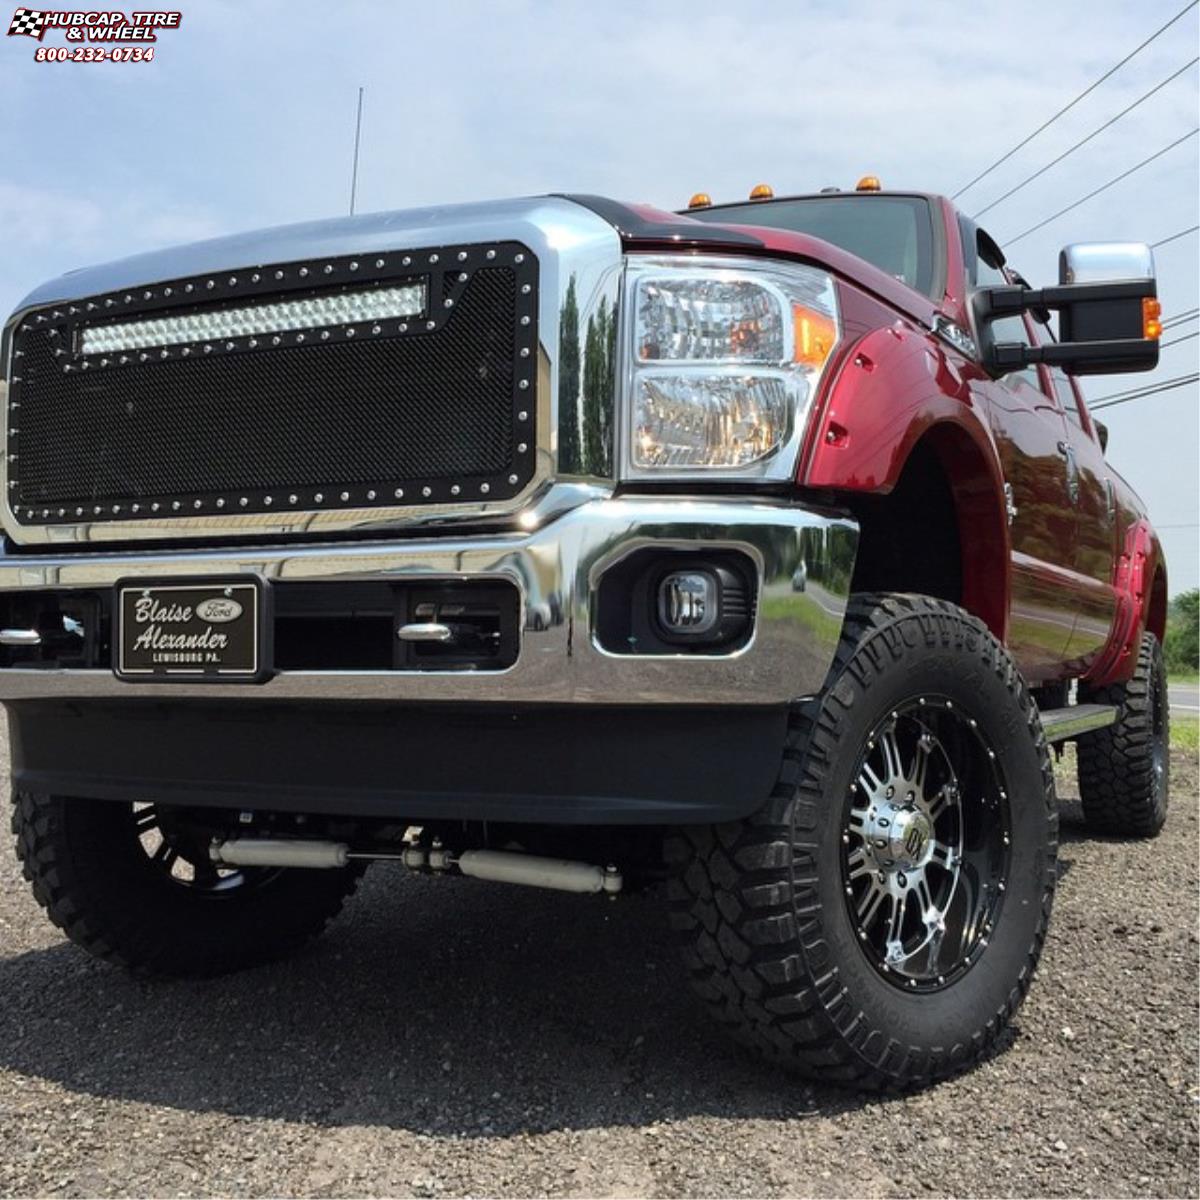 vehicle gallery/ford f 250 xd series xd795 hoss x  Gloss Black Machined wheels and rims